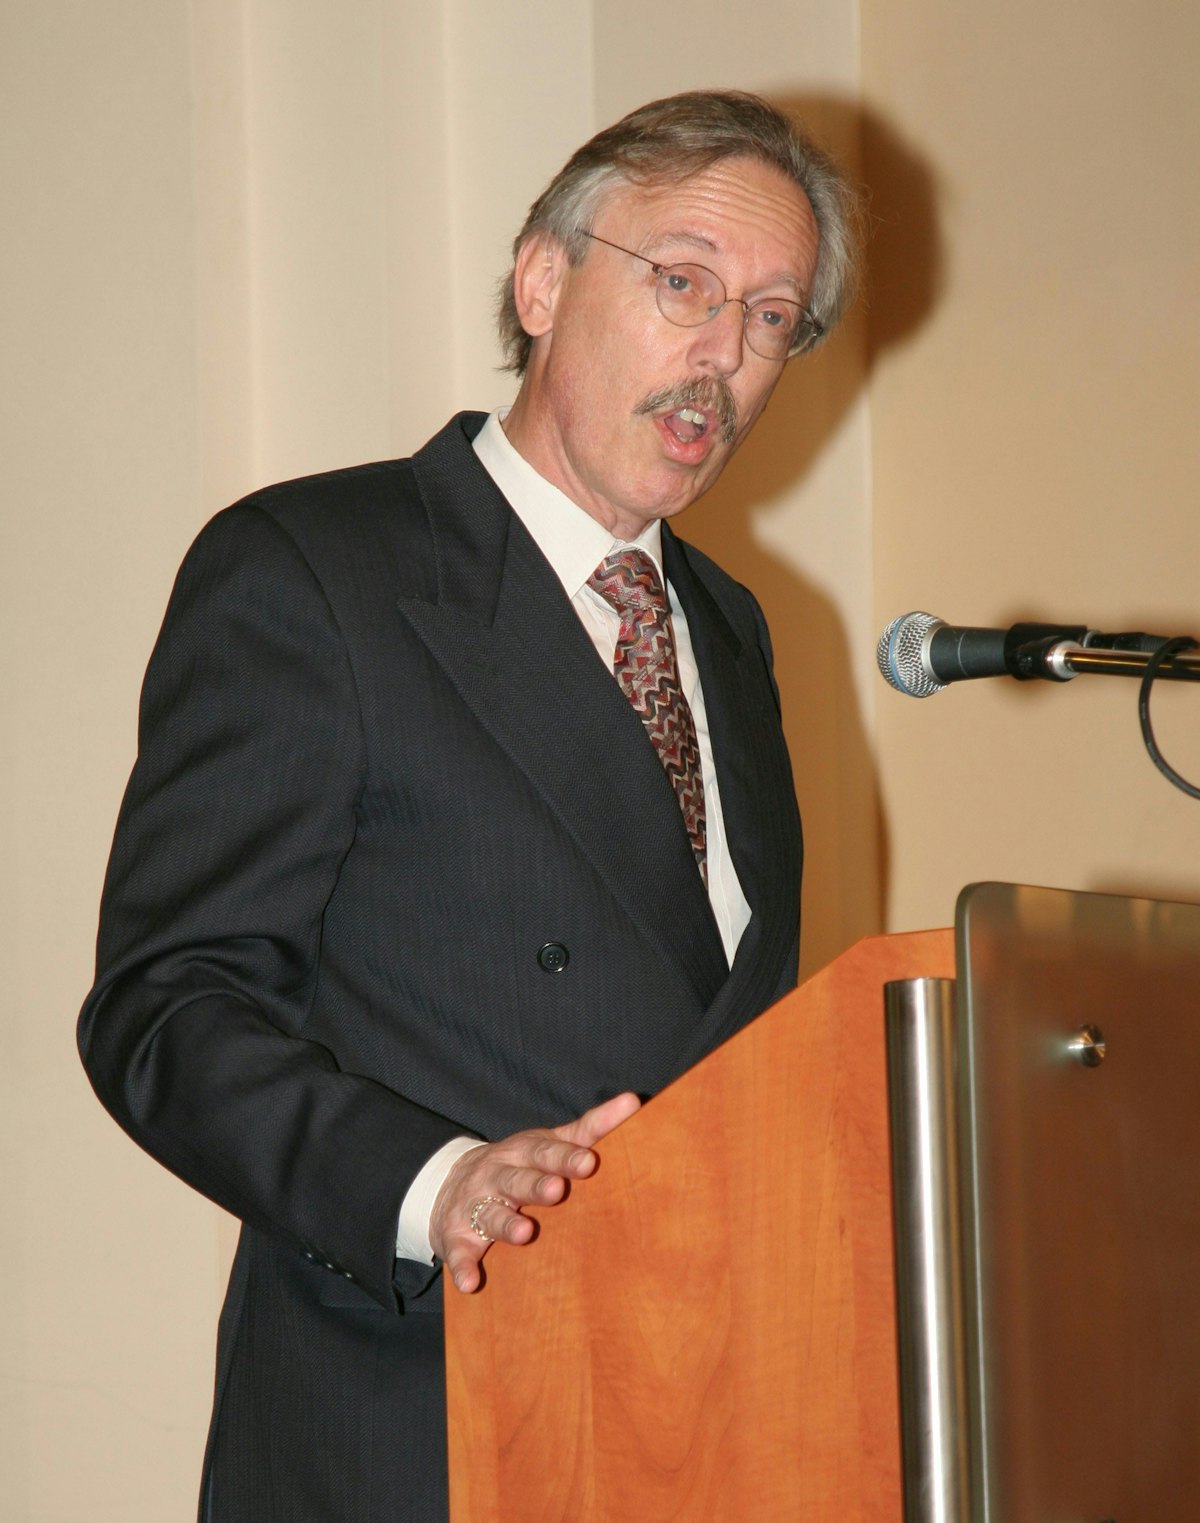 Piet de Klerk, Ambassador-at-Large of the Netherlands on Human Rights, was among the featured speakers at the Prague commemoration on 25 November 2006. Photograph by Hamid Jahanpour